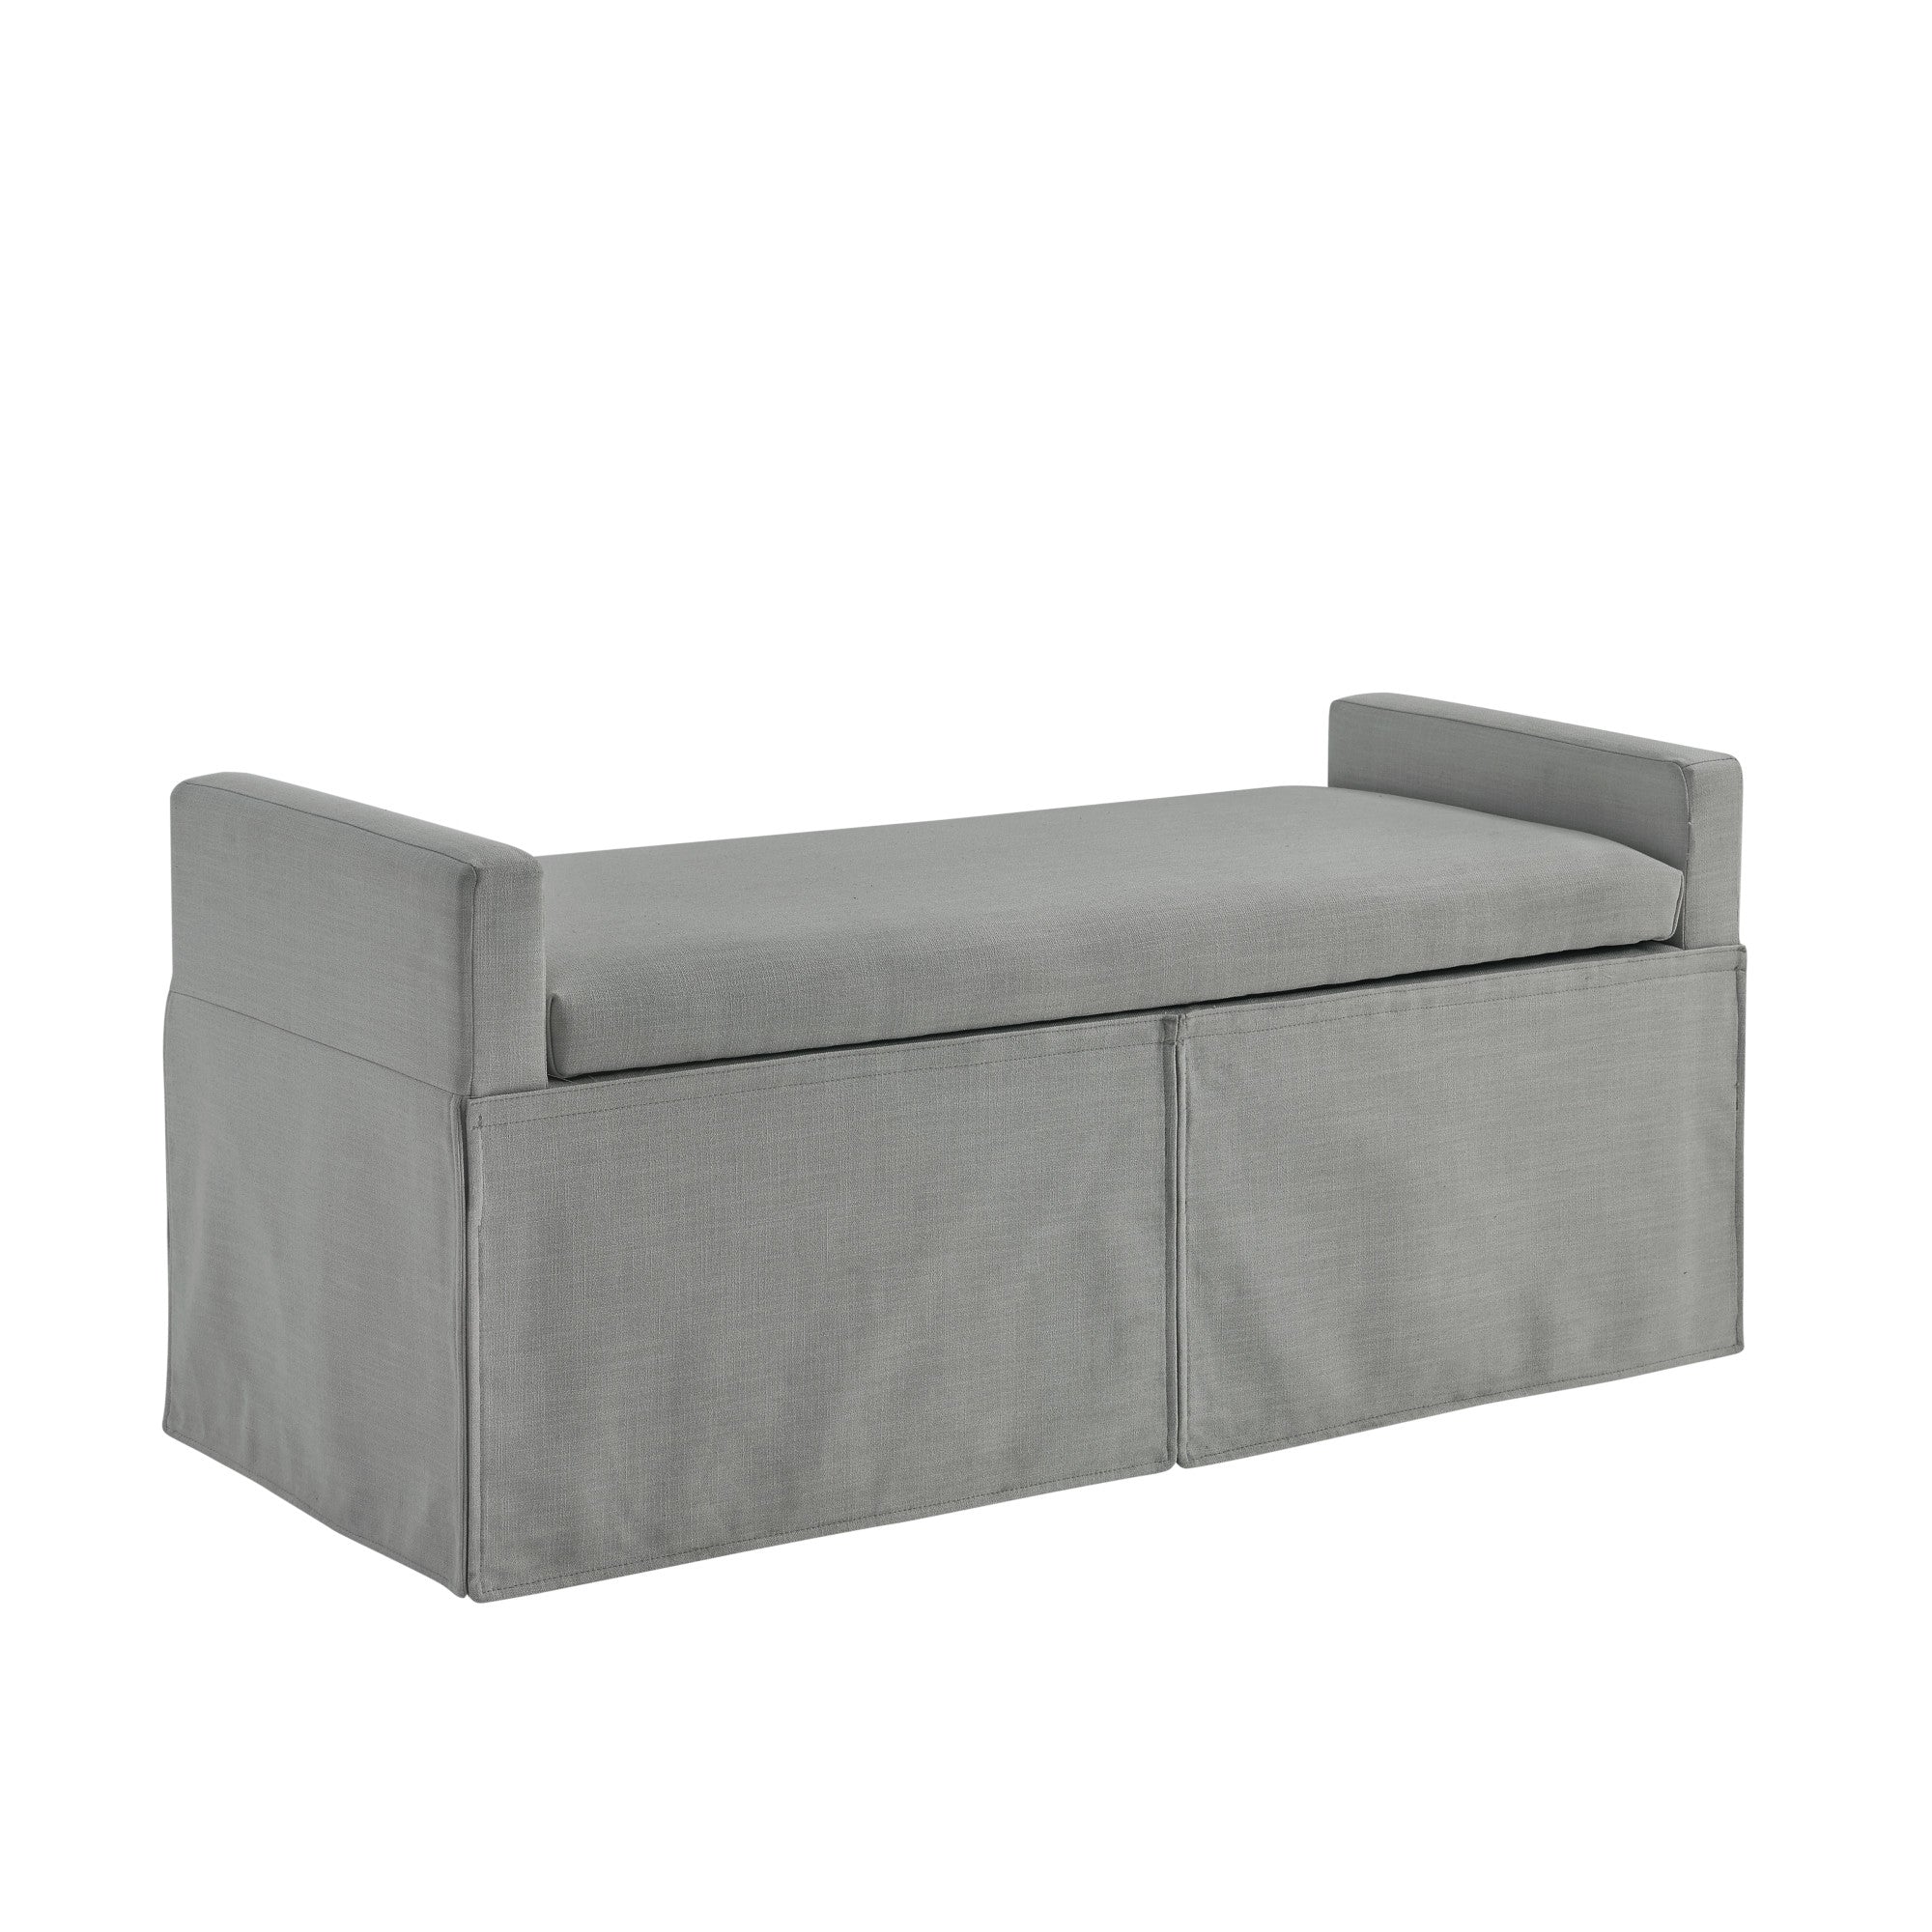 50" Light Gray Upholstered Linen Bench with Flip top, Shoe Storage